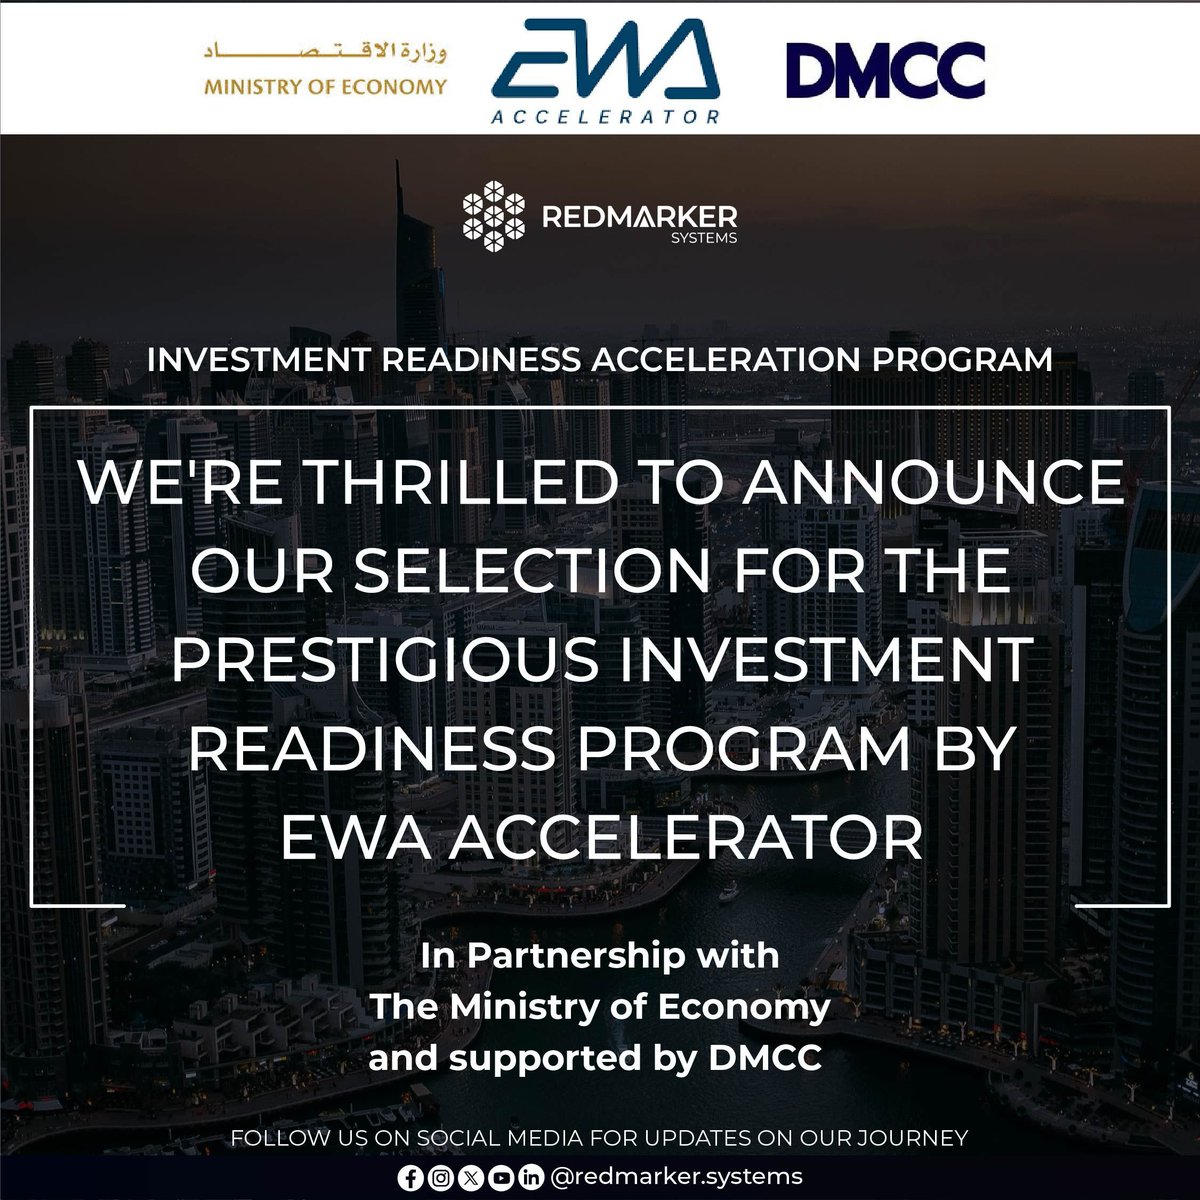 RedMarker Systems is on a journey to new heights!

Thrilled to share that we've been selected for the Investment Readiness Acceleration Program by EWA Accelerator, in collaboration with the Ministry Of Economy, UAE, and DMCC.

#RedMarkerSystems #EWAaccelerator #UAE